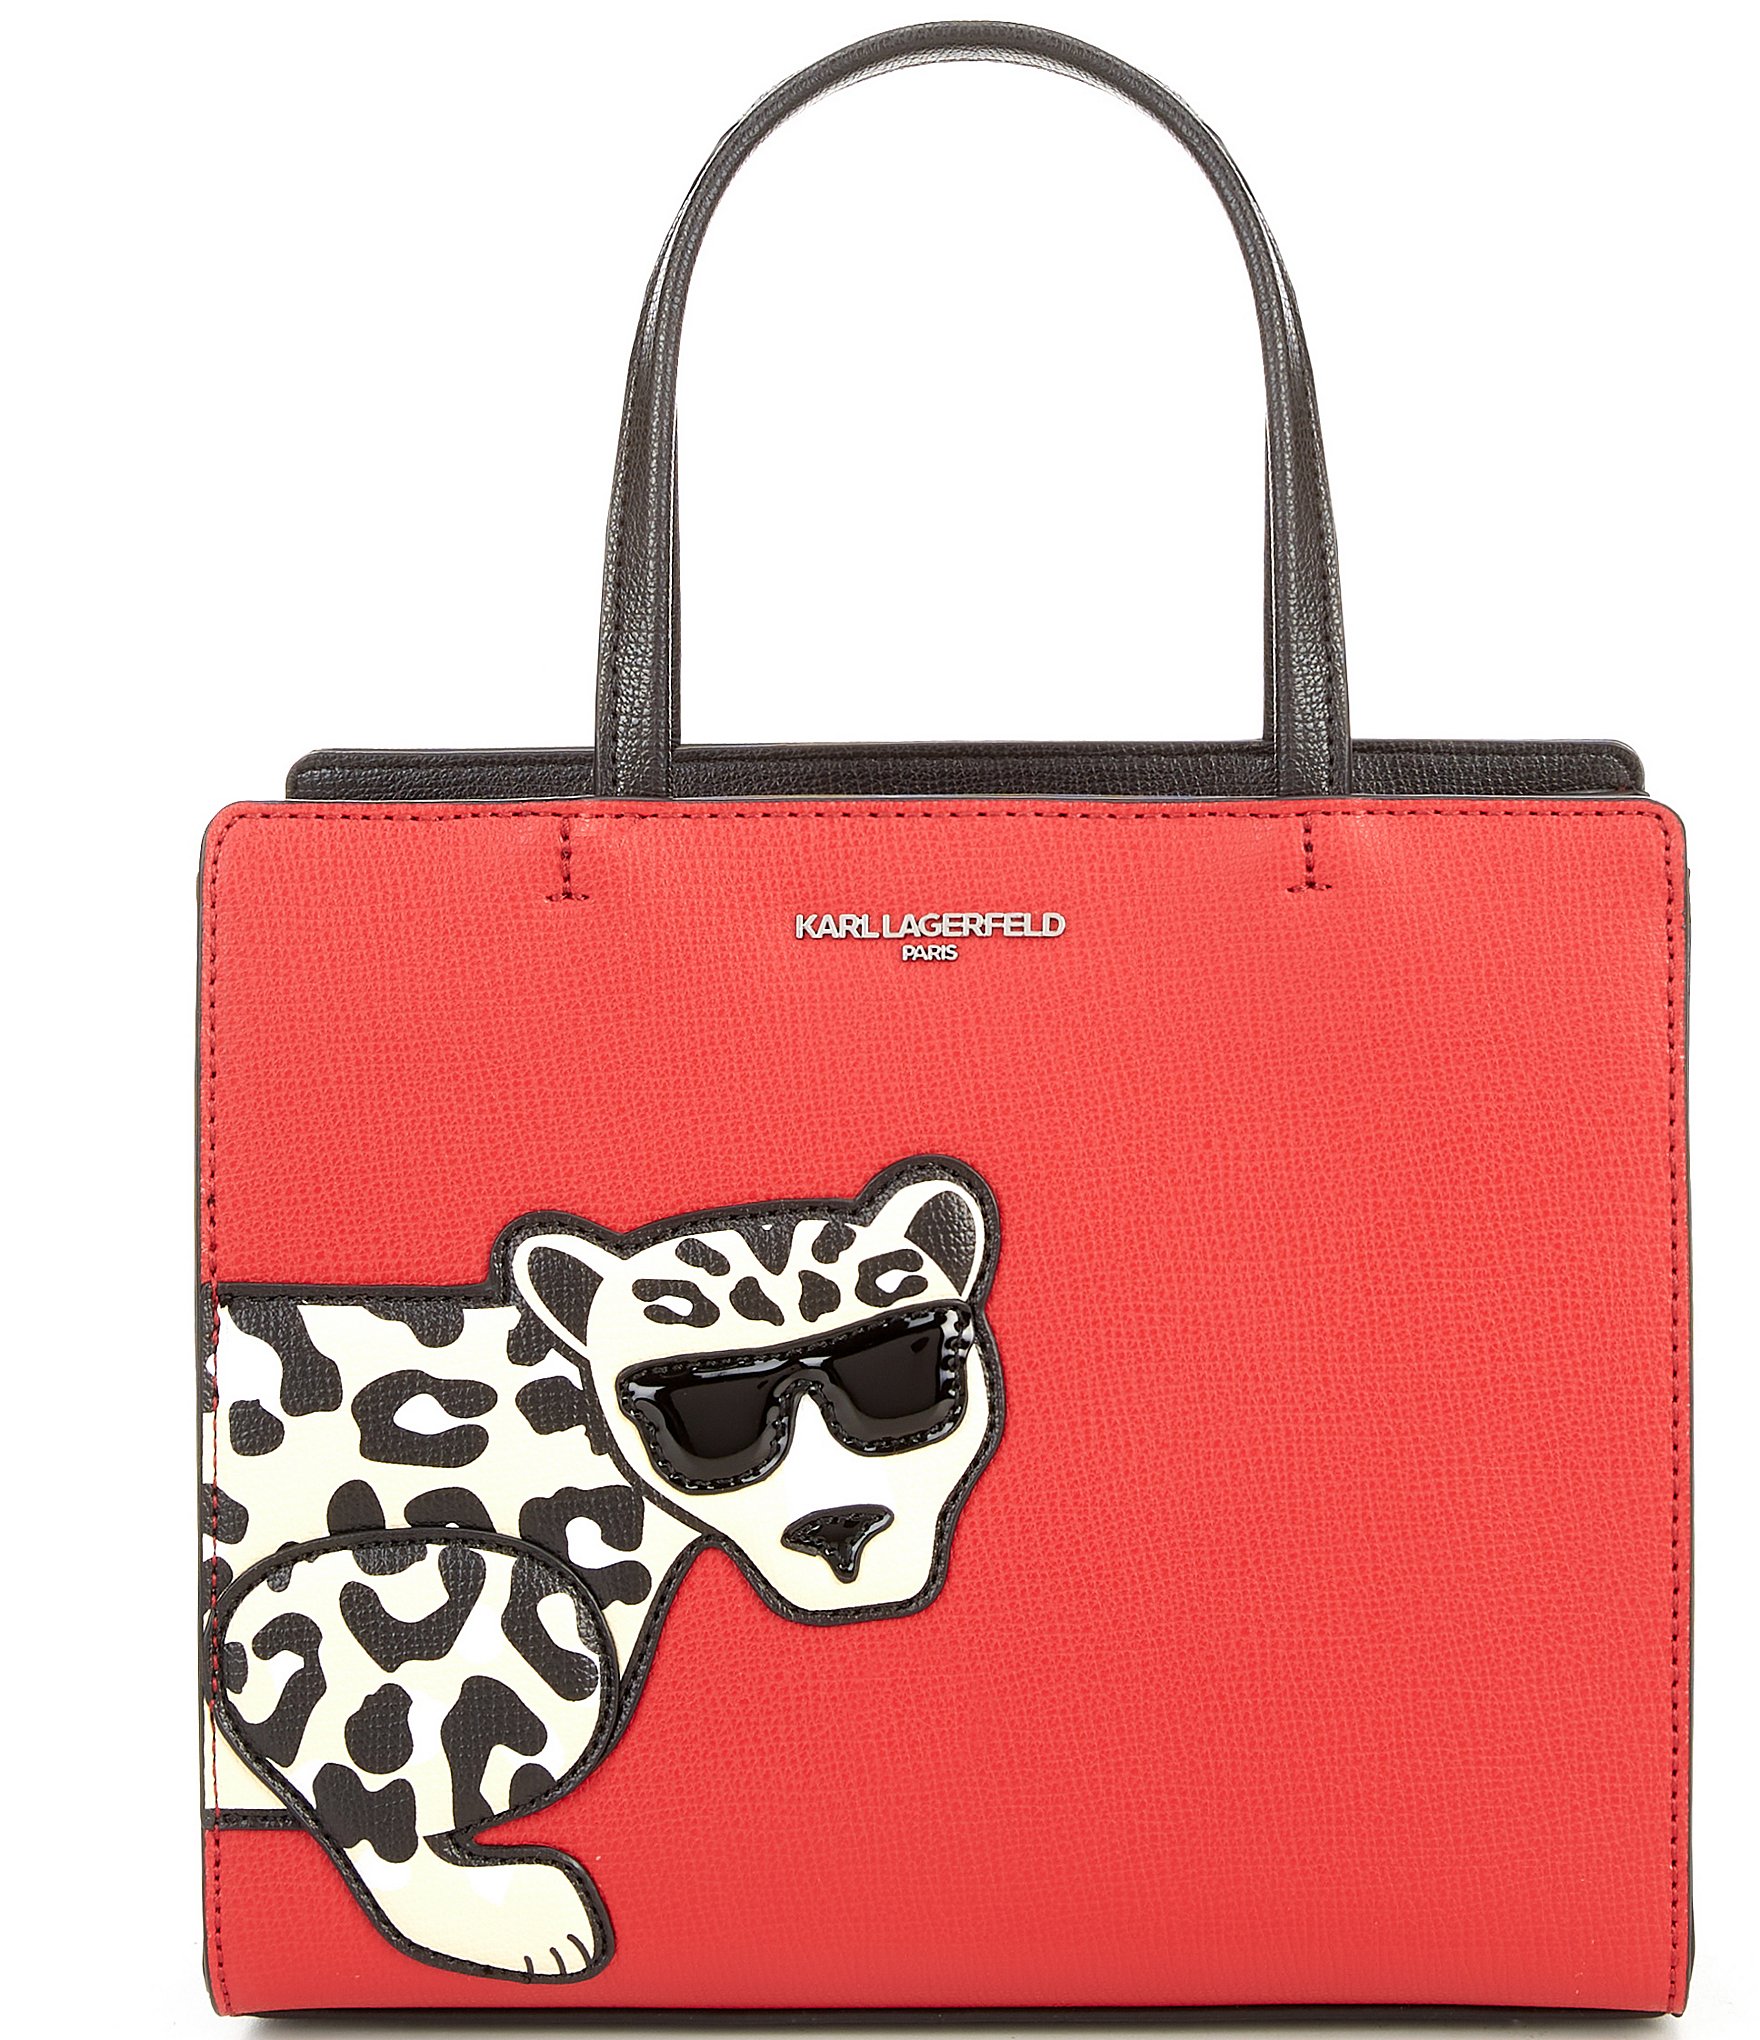 Karl Lagerfeld Maybelle Cell Phone Bag in Red